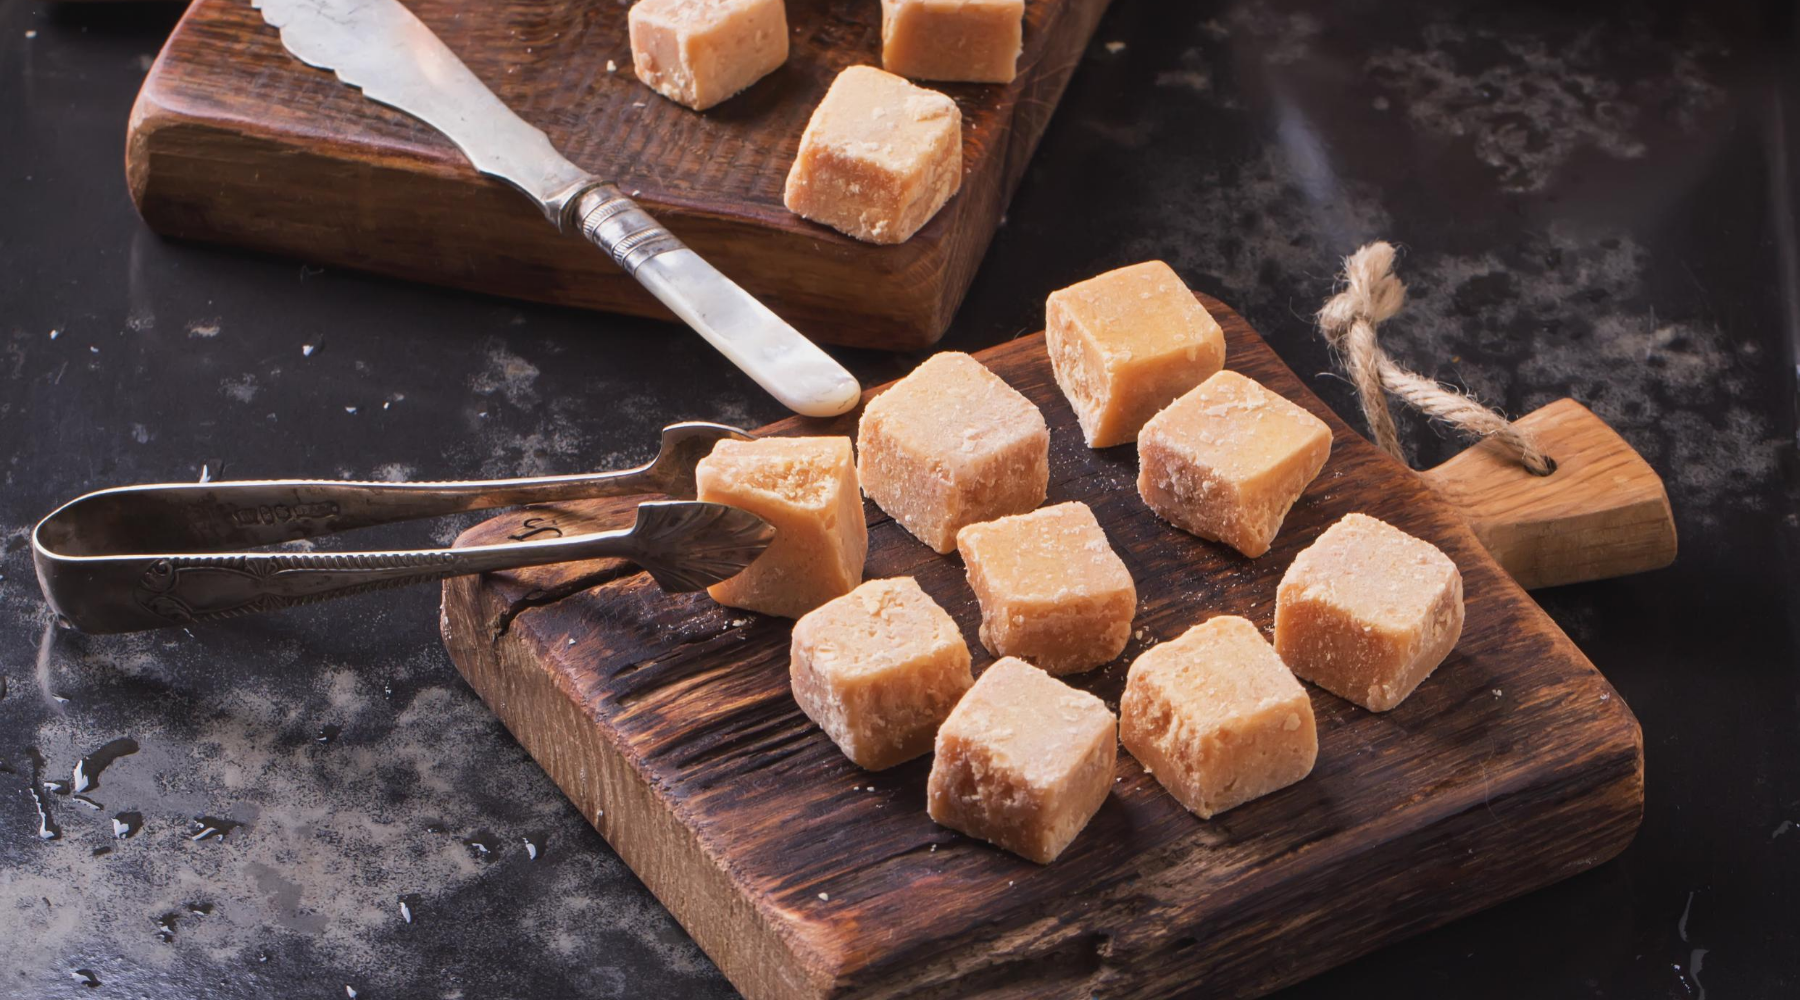 Getting 70-80% of your calories from healthy fats while on a keto diet can be challenging. Fat bombs are low-carb, high-fat treats designed to help get and keep you in ketosis. 